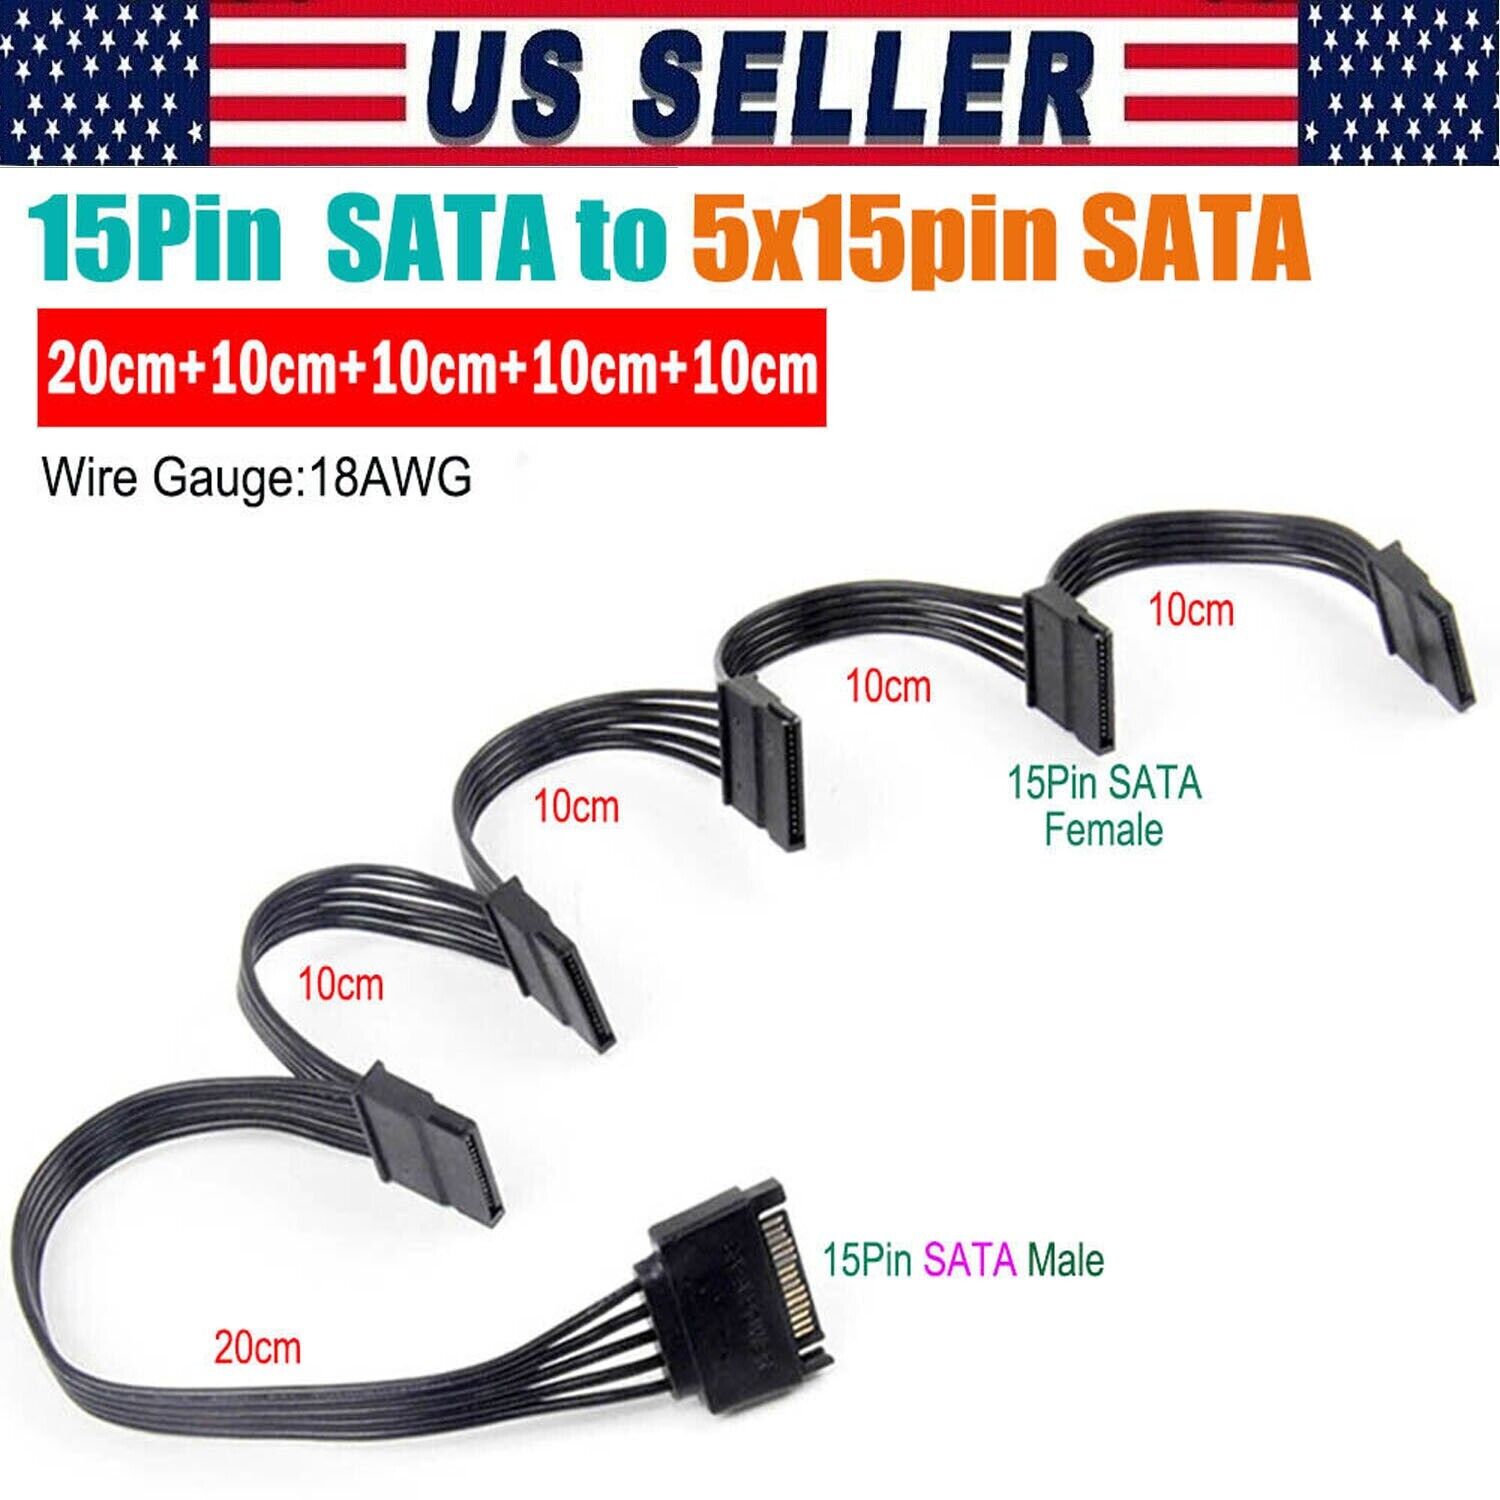 15 Pin SATA Power Y-Splitter Cable Adapter Extension 1 Male to 5 Female for HDD